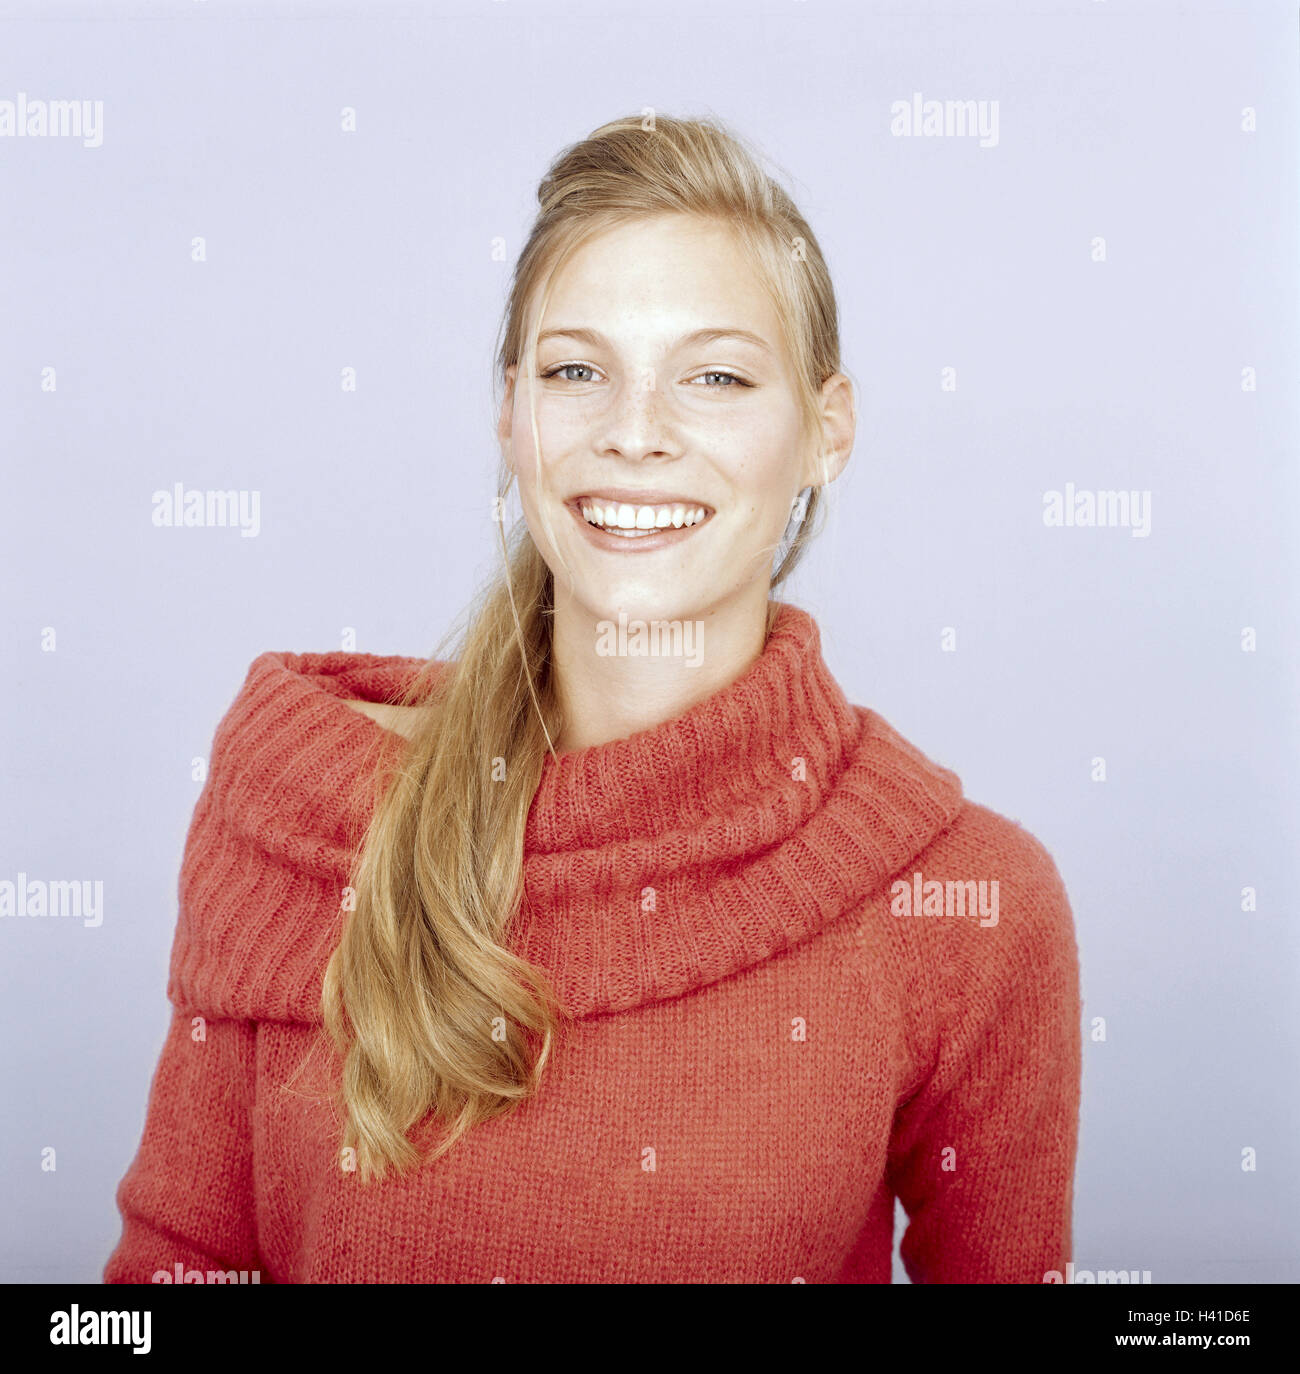 Youthfully, blond, view camera, smile, portrait, freely for Großflächenplakatierung 16-20 years, 20-30 years, woman, young, long-haired, hairs tied together, pullovers orange, knitted pullover, naturalness, do not stand, friendly, balance, happy, joy, hap Stock Photo